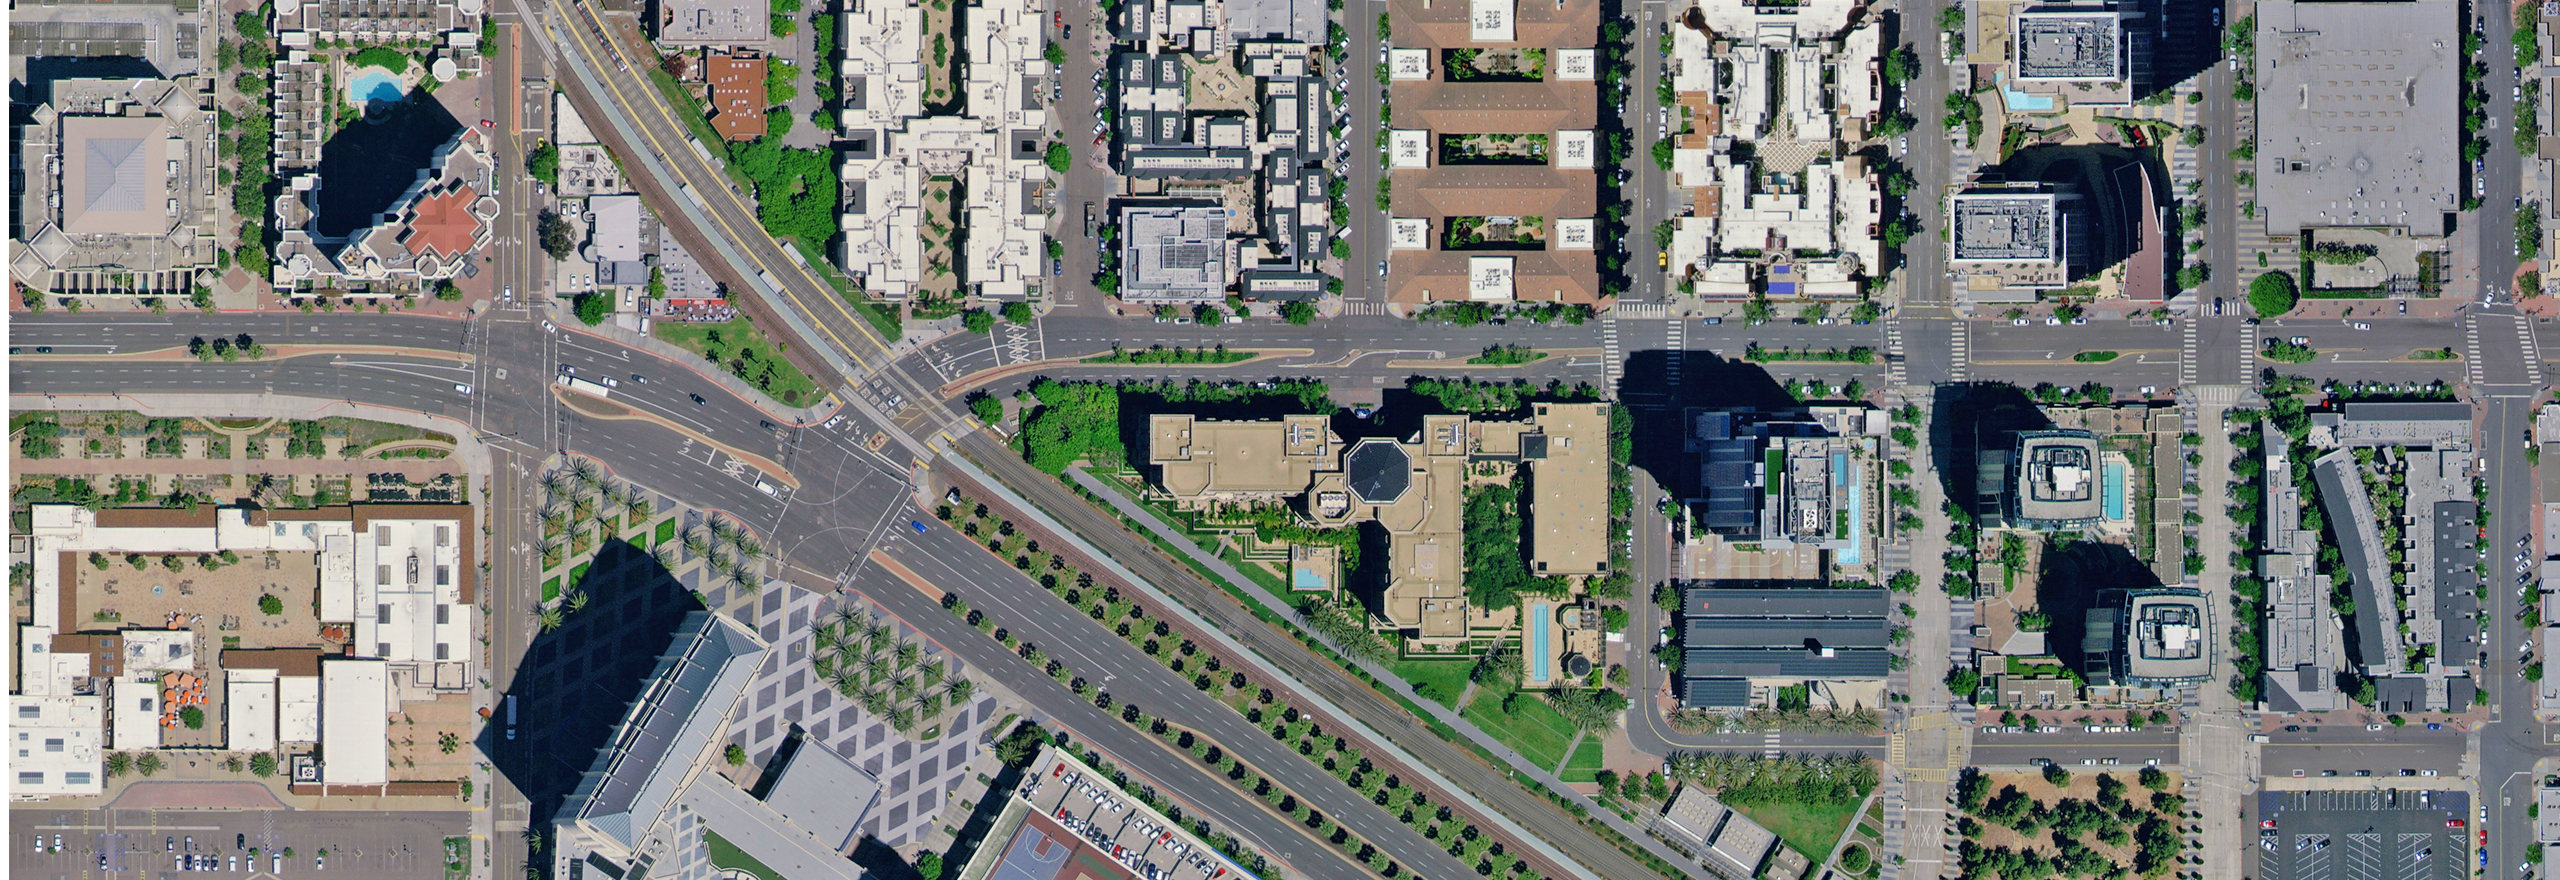 high quality aerial imagery of city blocks in San Diego